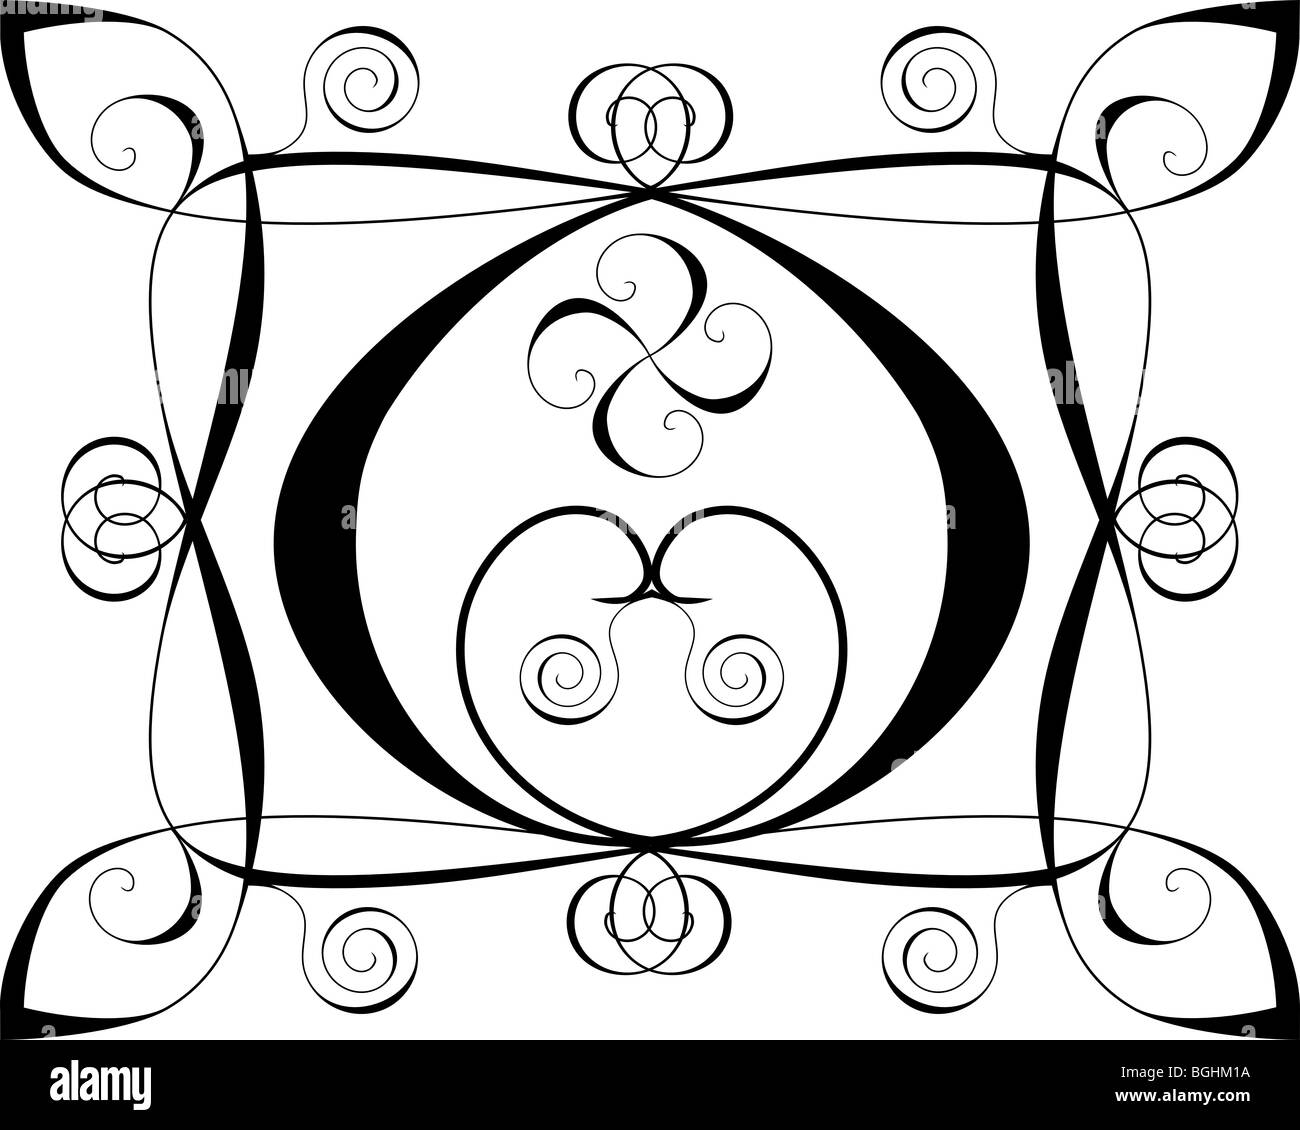 Design background with hearts and spirals on white Stock Photo